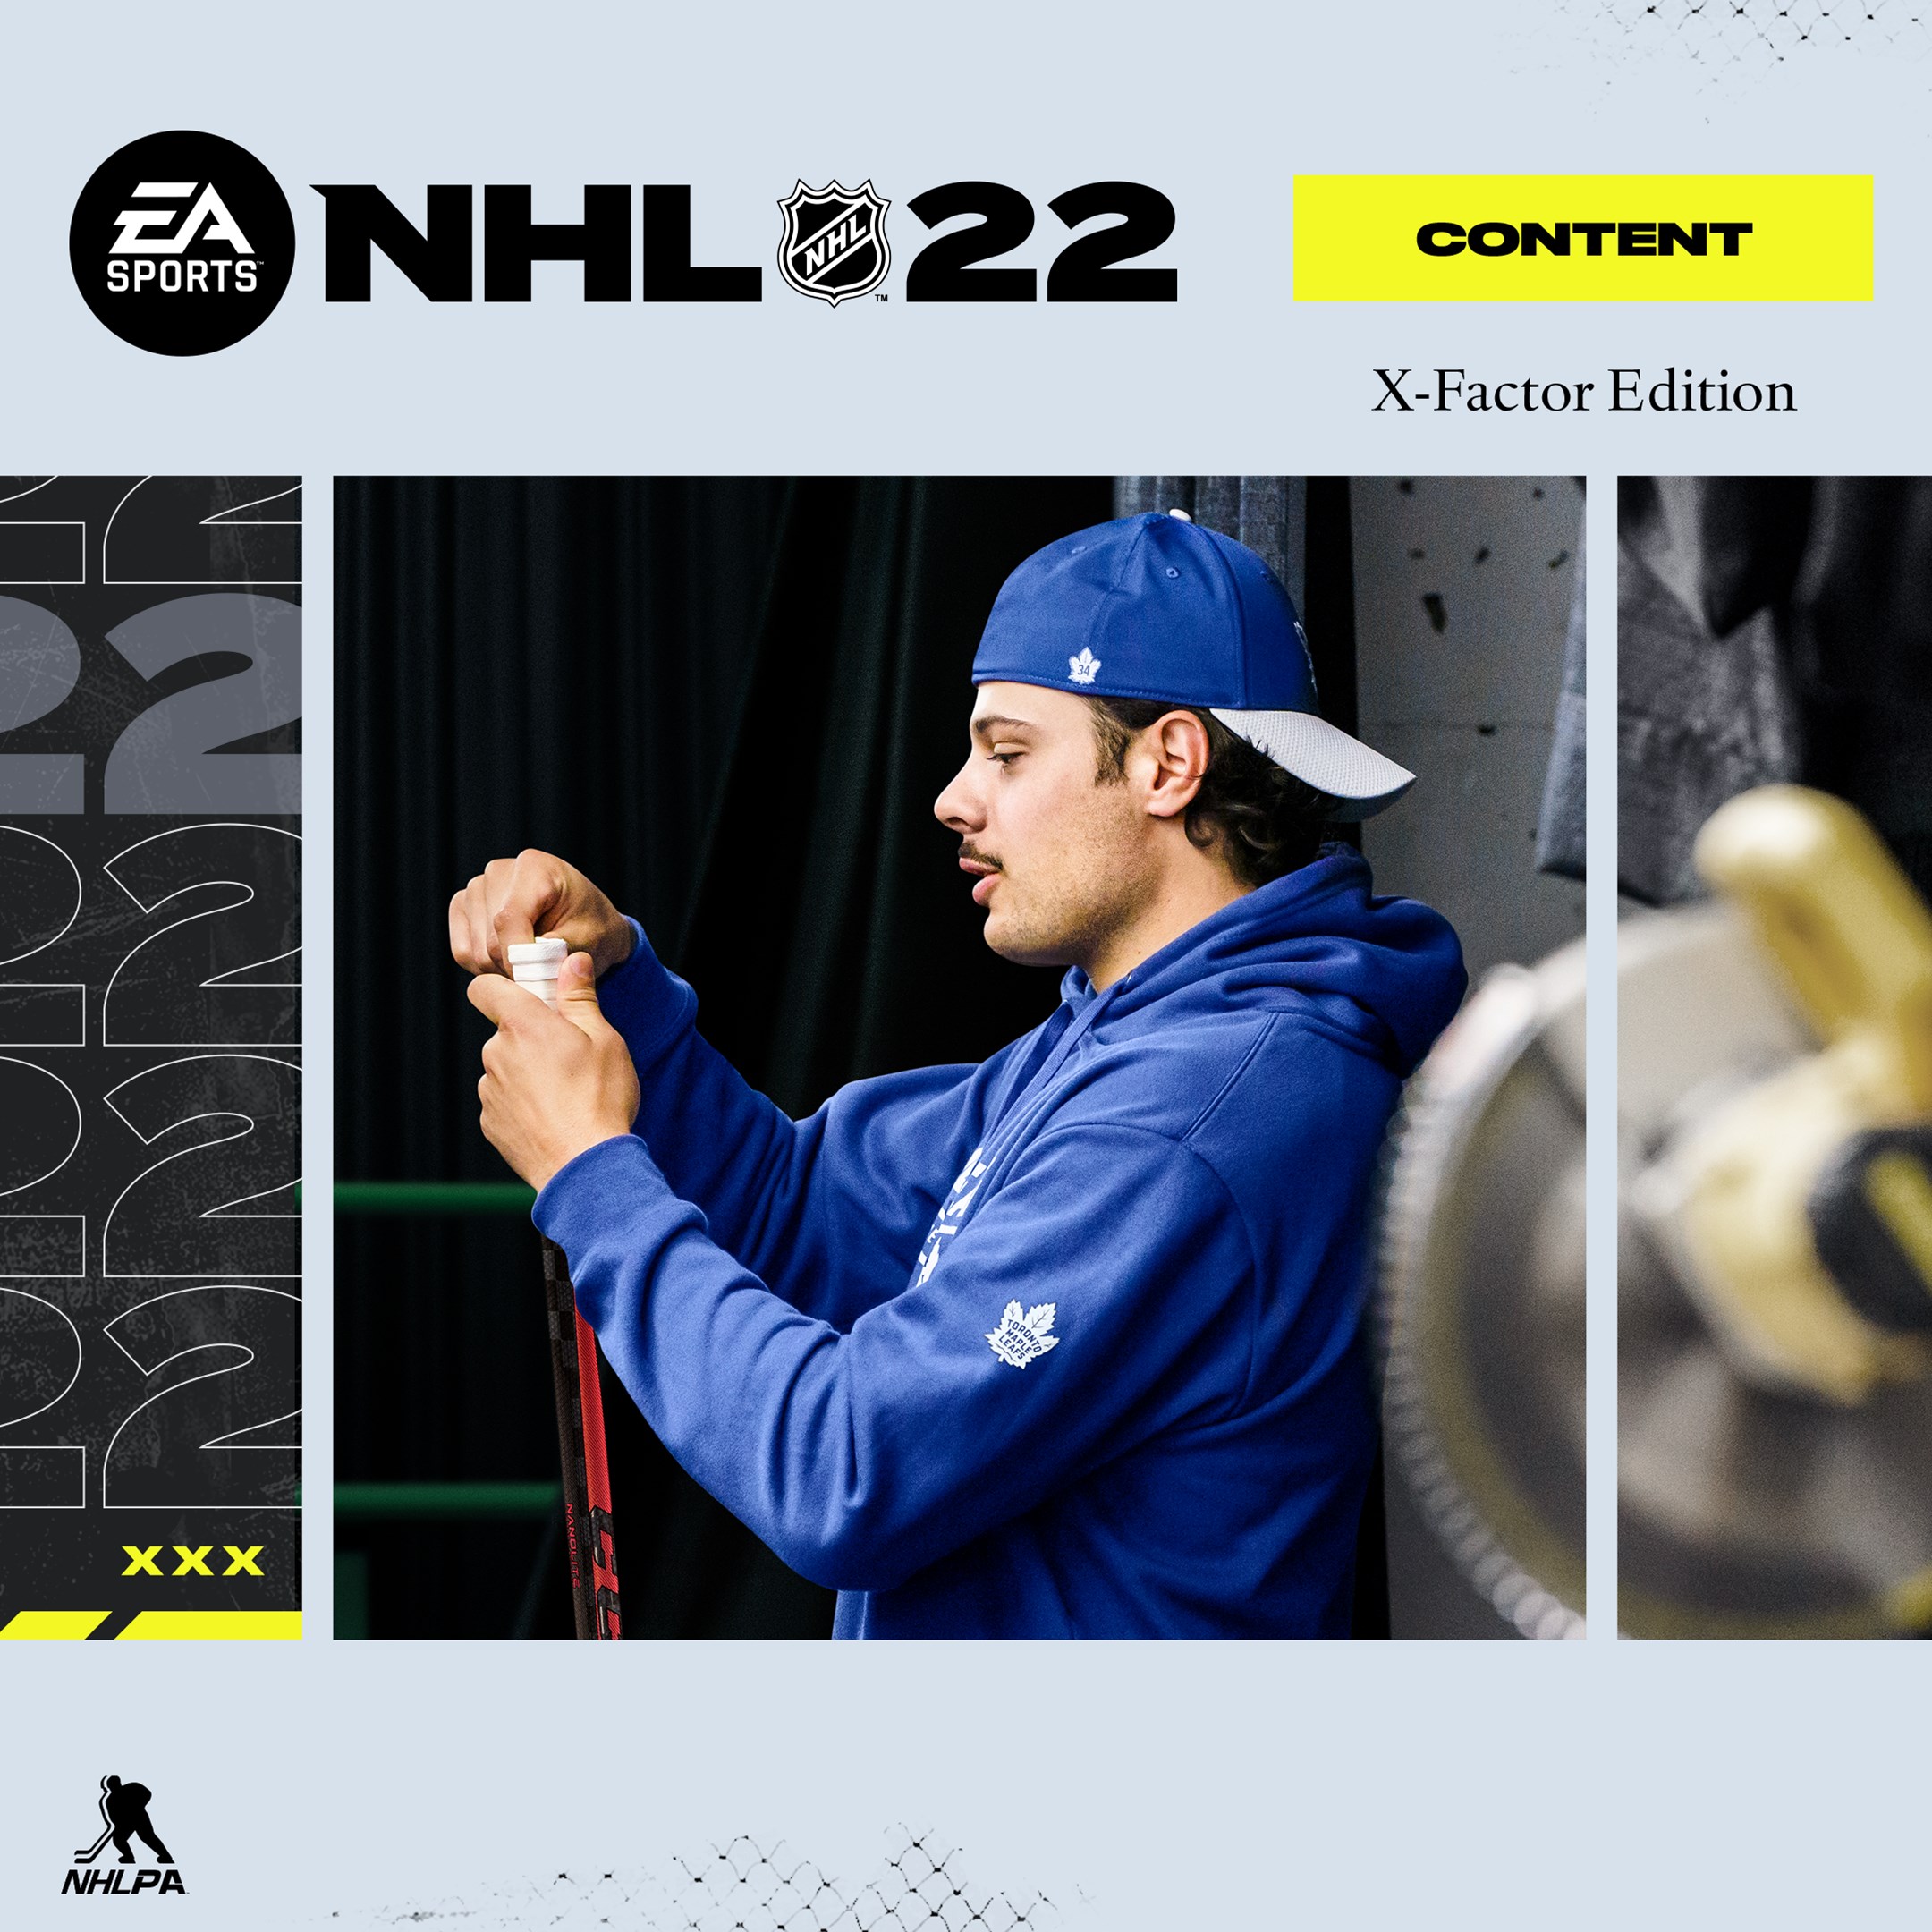 NHL™ 22 X-Factor Edition Content